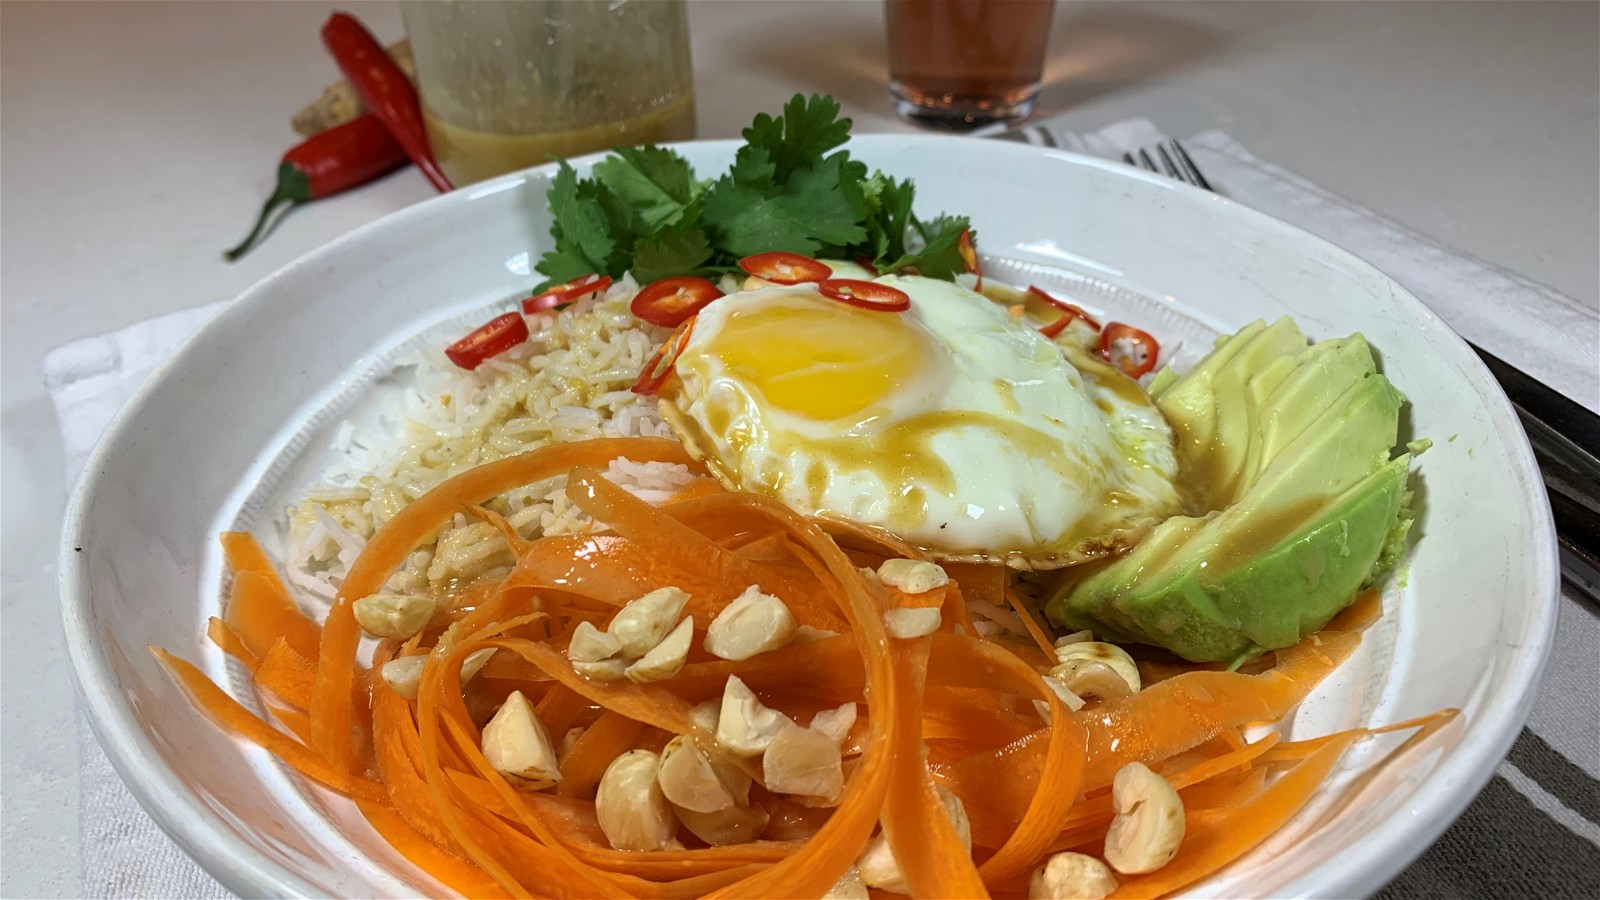 Image of Basmati Rice Bowl with Fried Egg, Avocado, Carrots and Soy Dressing